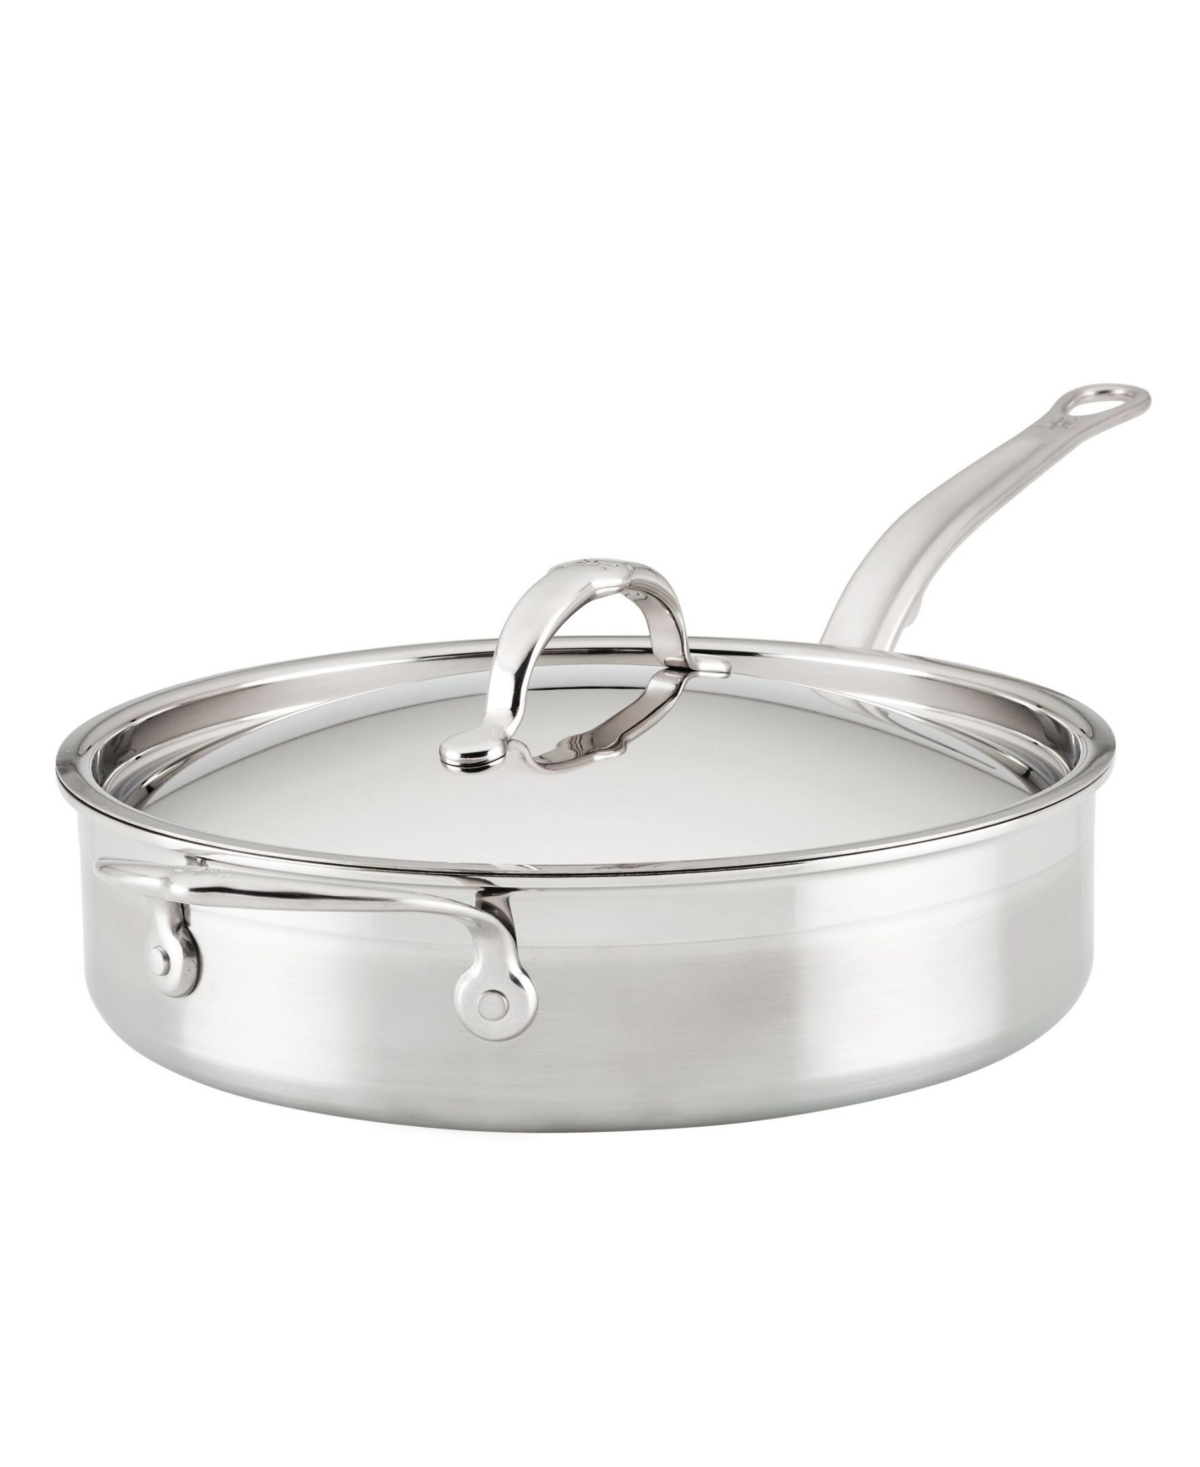 Hestan Probond Clad Stainless Steel With Titum Nonstick 3-quart Covered Saute Pan